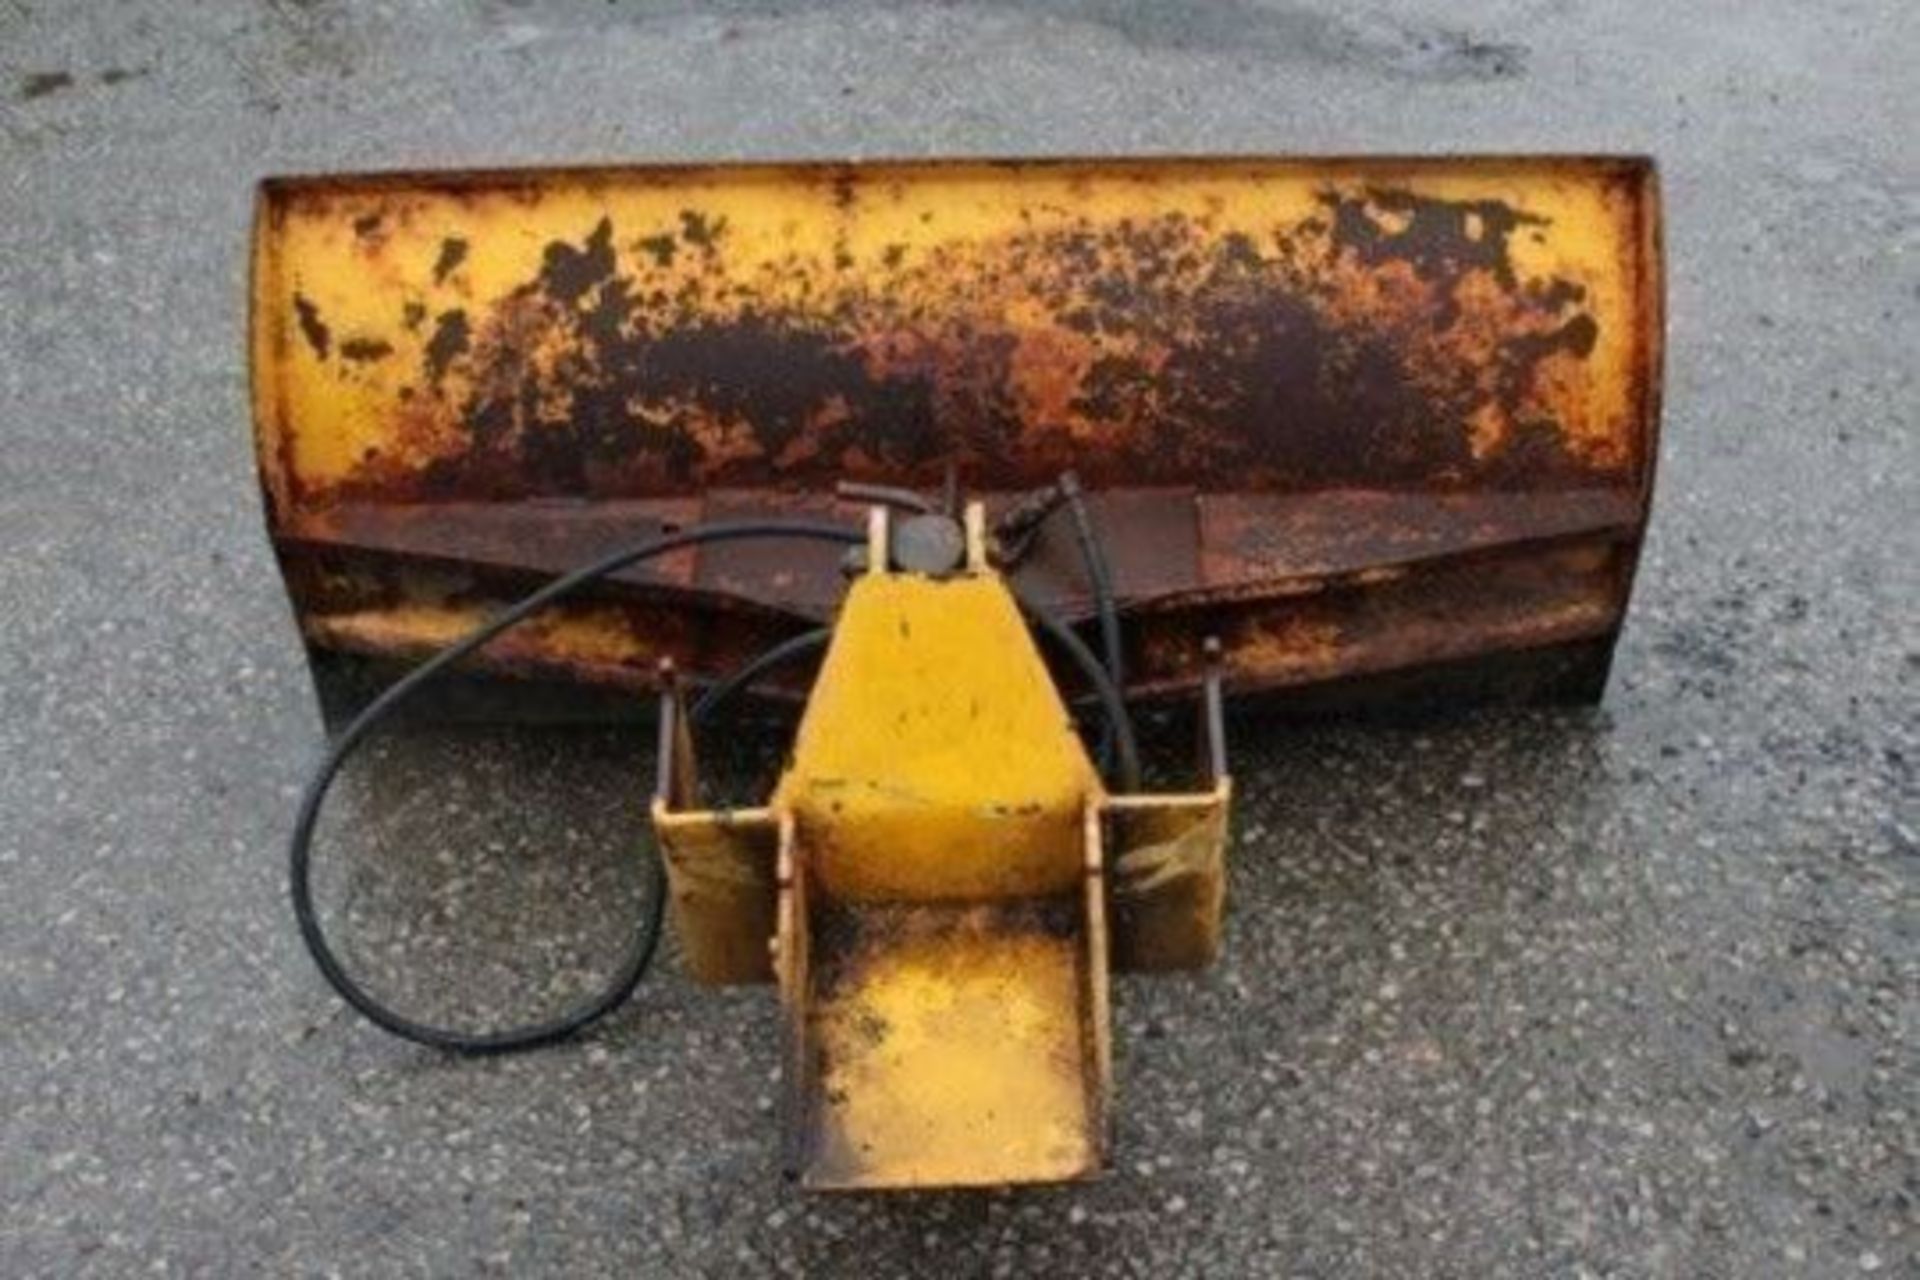 Snow Plow Attachment For Compact Tractor - Image 3 of 3